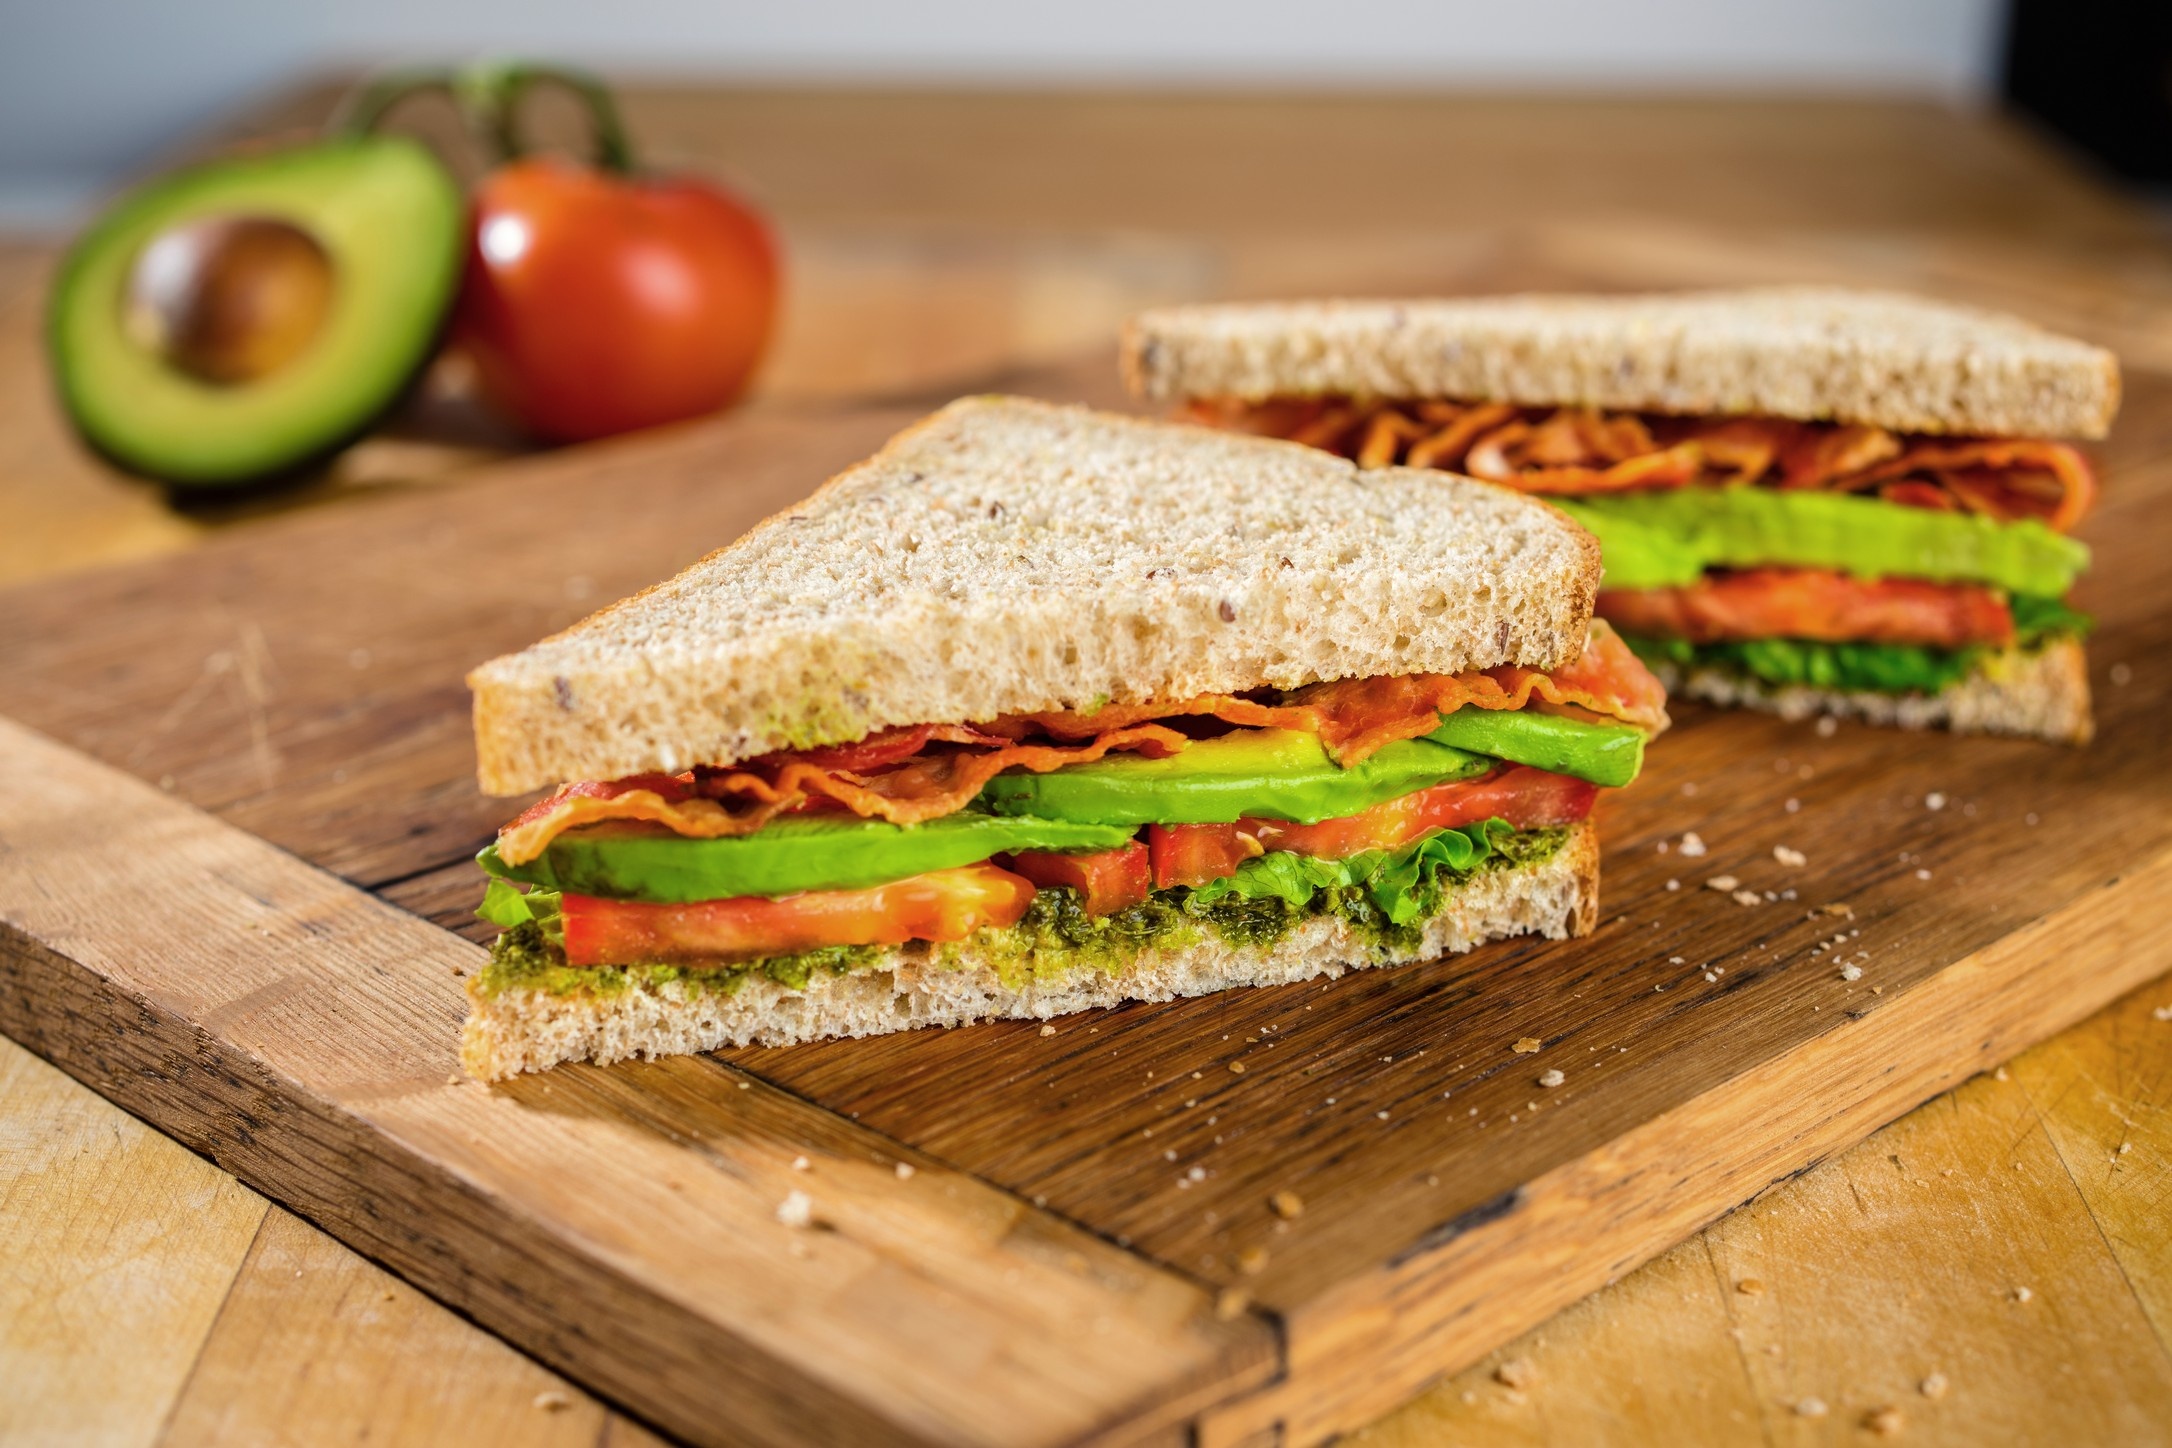 Sandwich: Customized according to personal tastes and dietary needs. 2180x1450 HD Background.